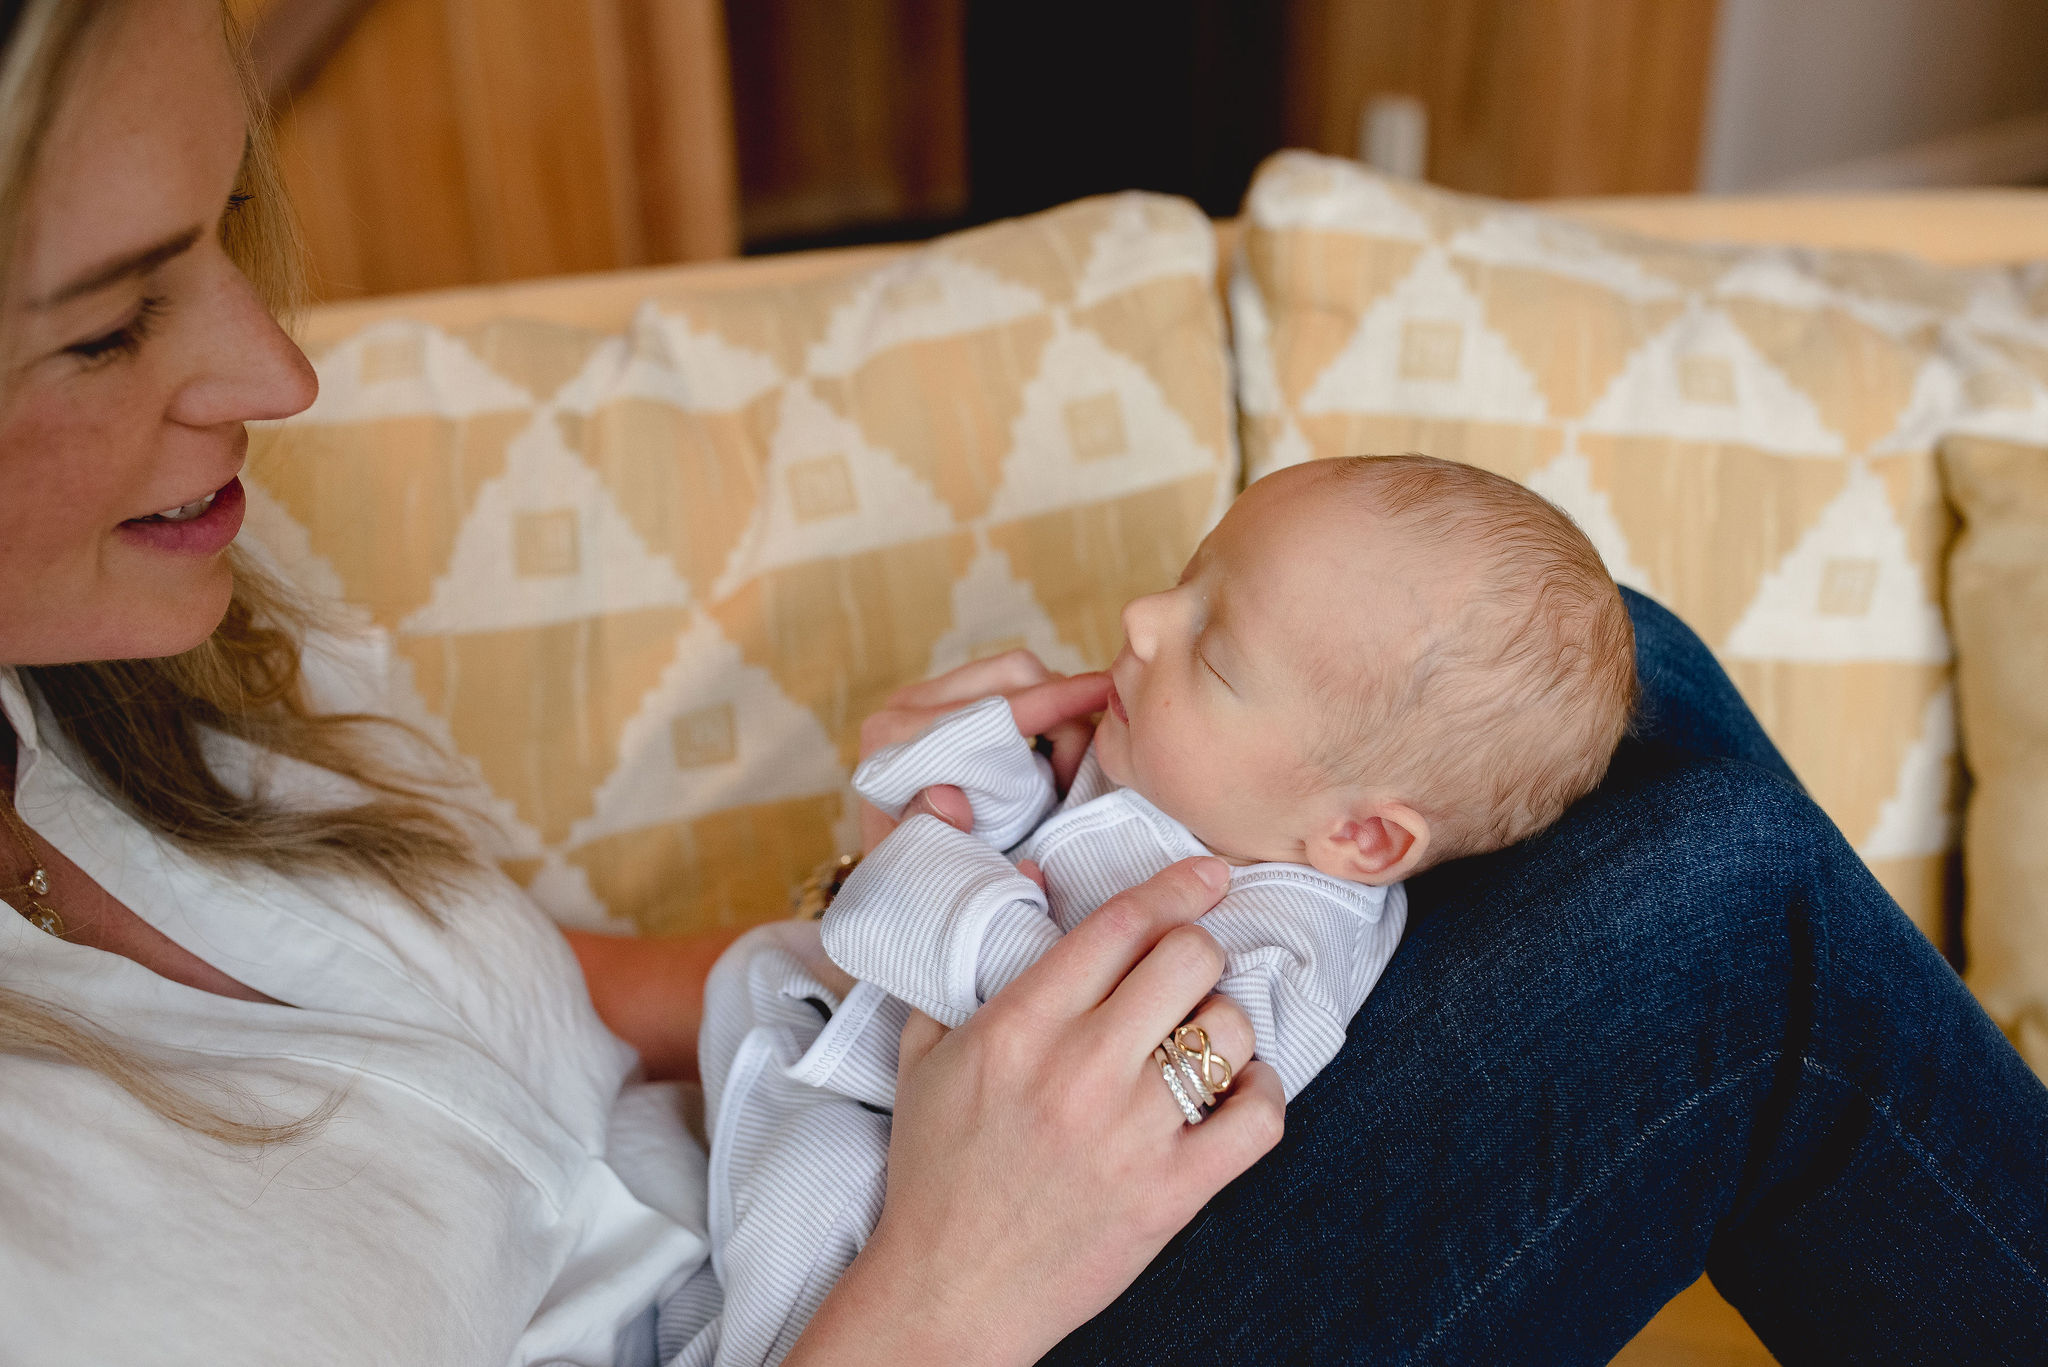 A newborn baby sleeps on mom's lap while they sit on a couch